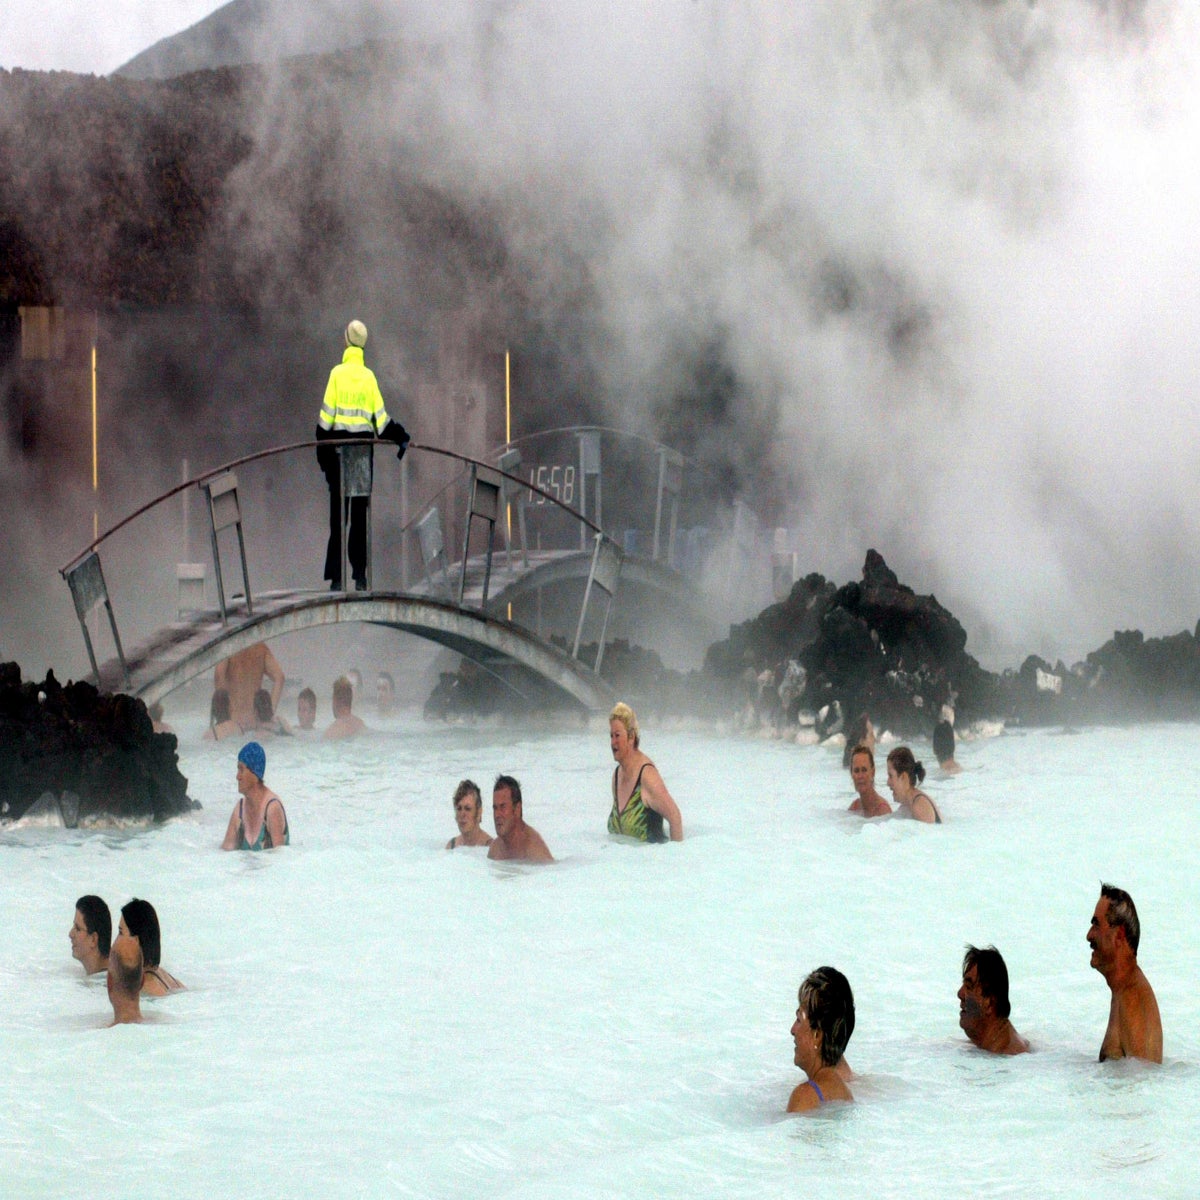 Blue Lagoon: Iceland's famous spa temporarily shuts down over